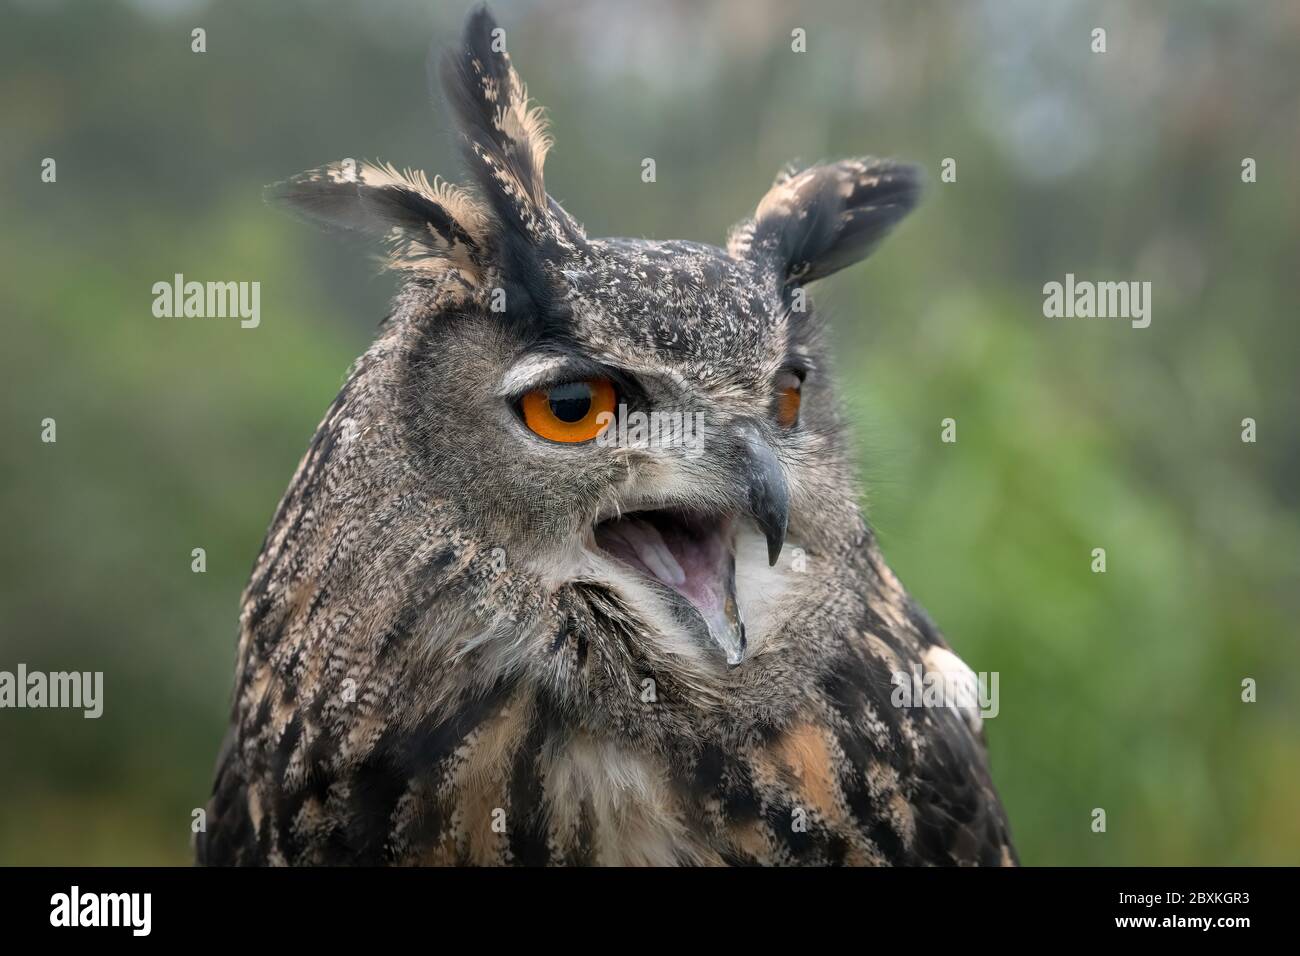 Eurasian eagle-owl closeup portrait with mouth open, surrounded by green trees Stock Photo